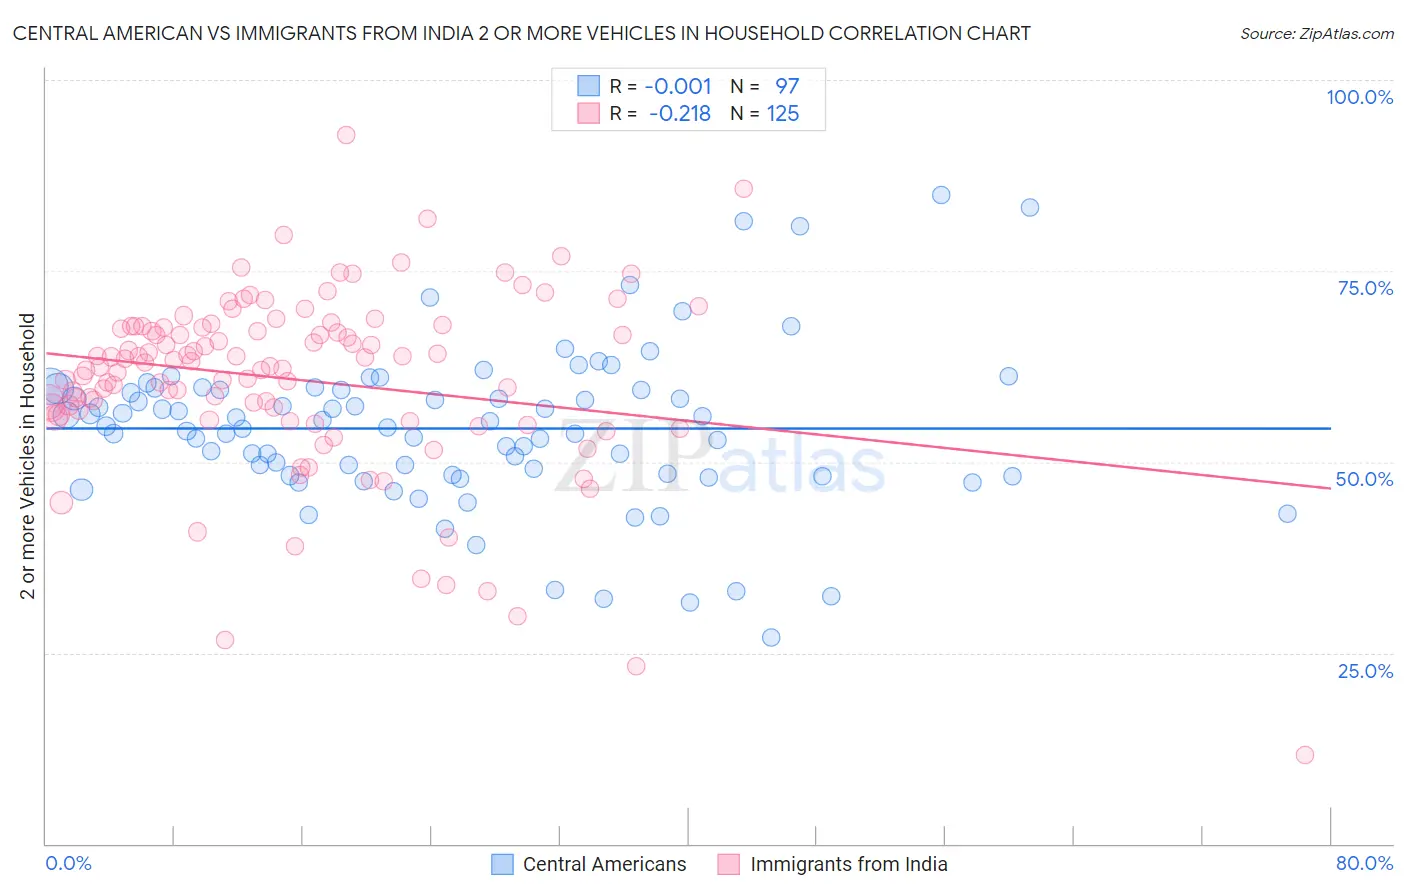 Central American vs Immigrants from India 2 or more Vehicles in Household